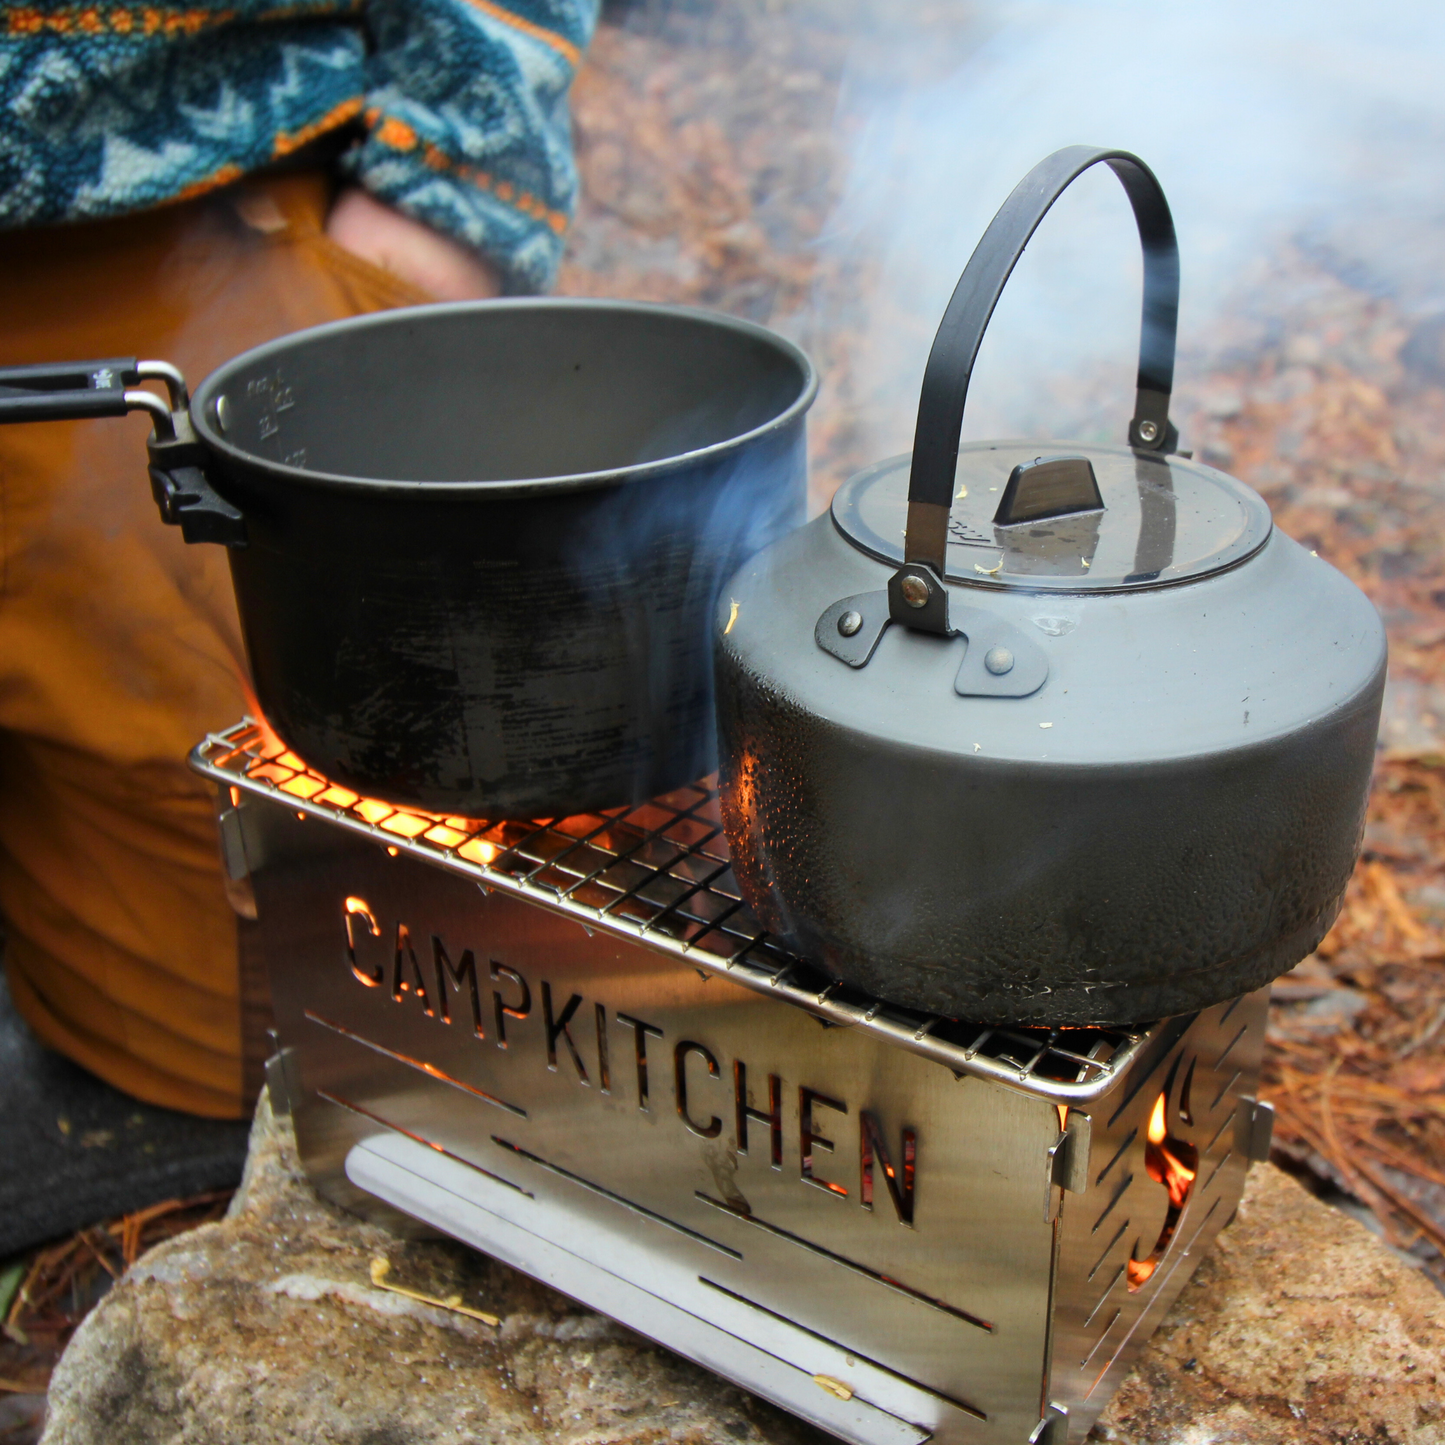 CAMPKITCHEN Twig Stove in action. Stove is lit with a pot and a kettle ready to rock. Flames light up the CAMPKITCHEN logo.